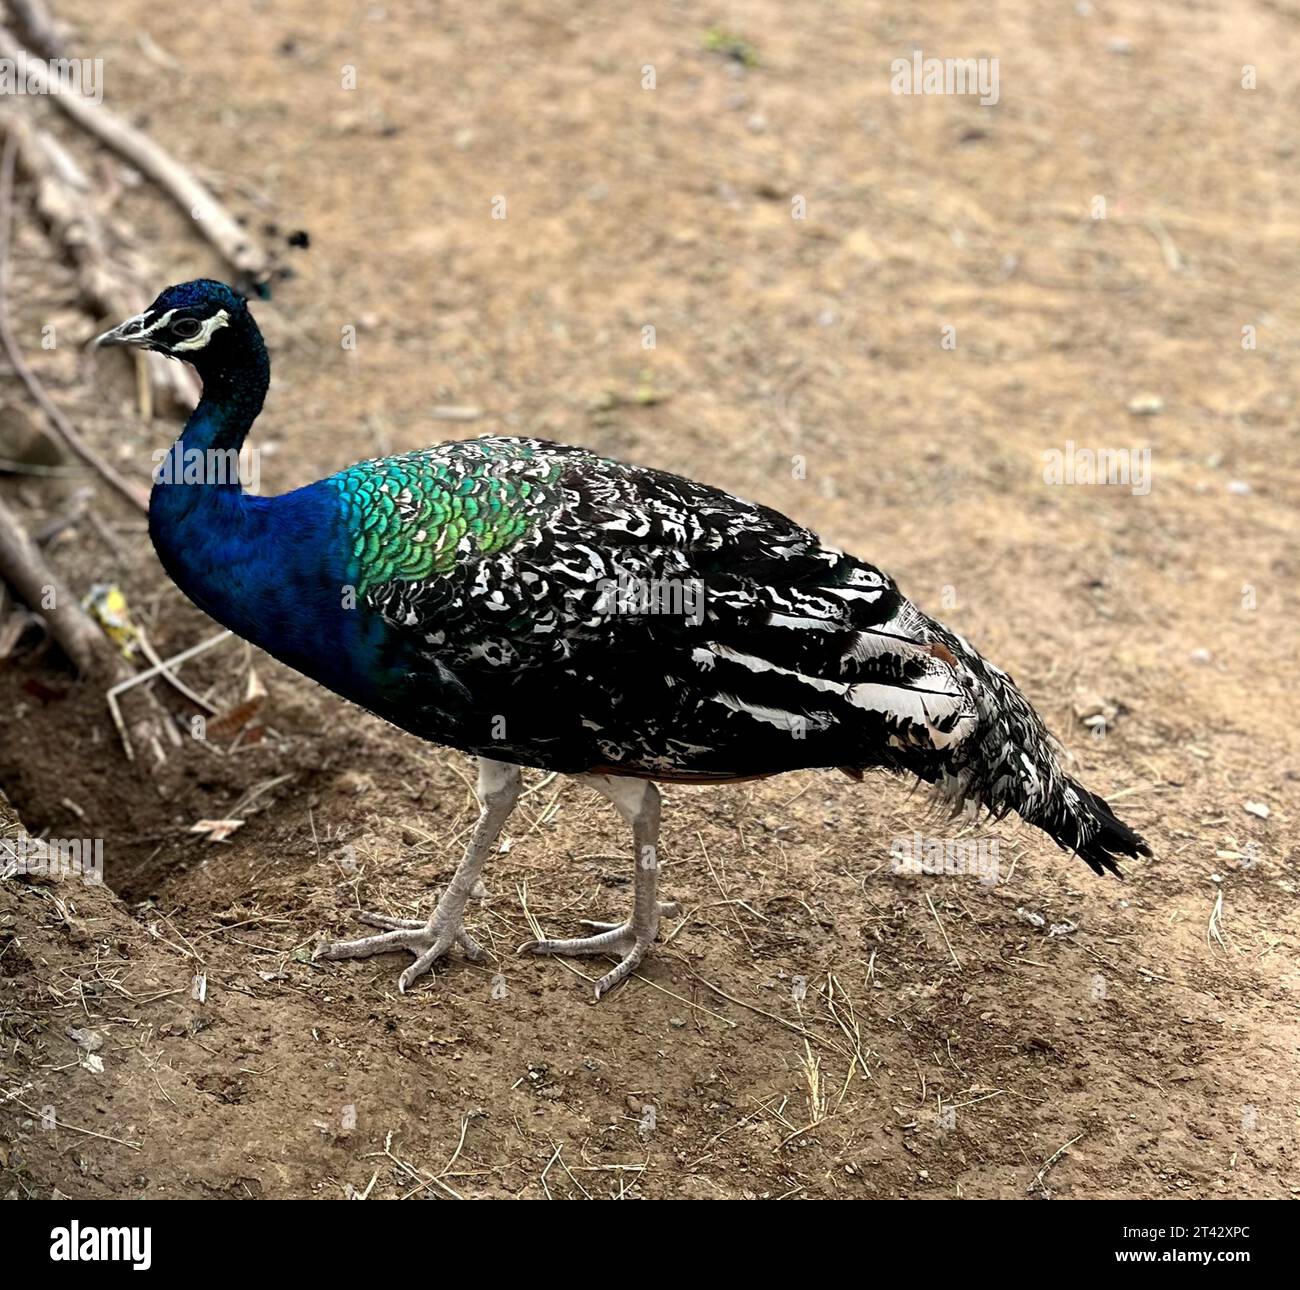 A majestic peacock struts across a sun-dappled dirt path on a warm summer day, framed by lush shrubbery and a fallen log Stock Photo